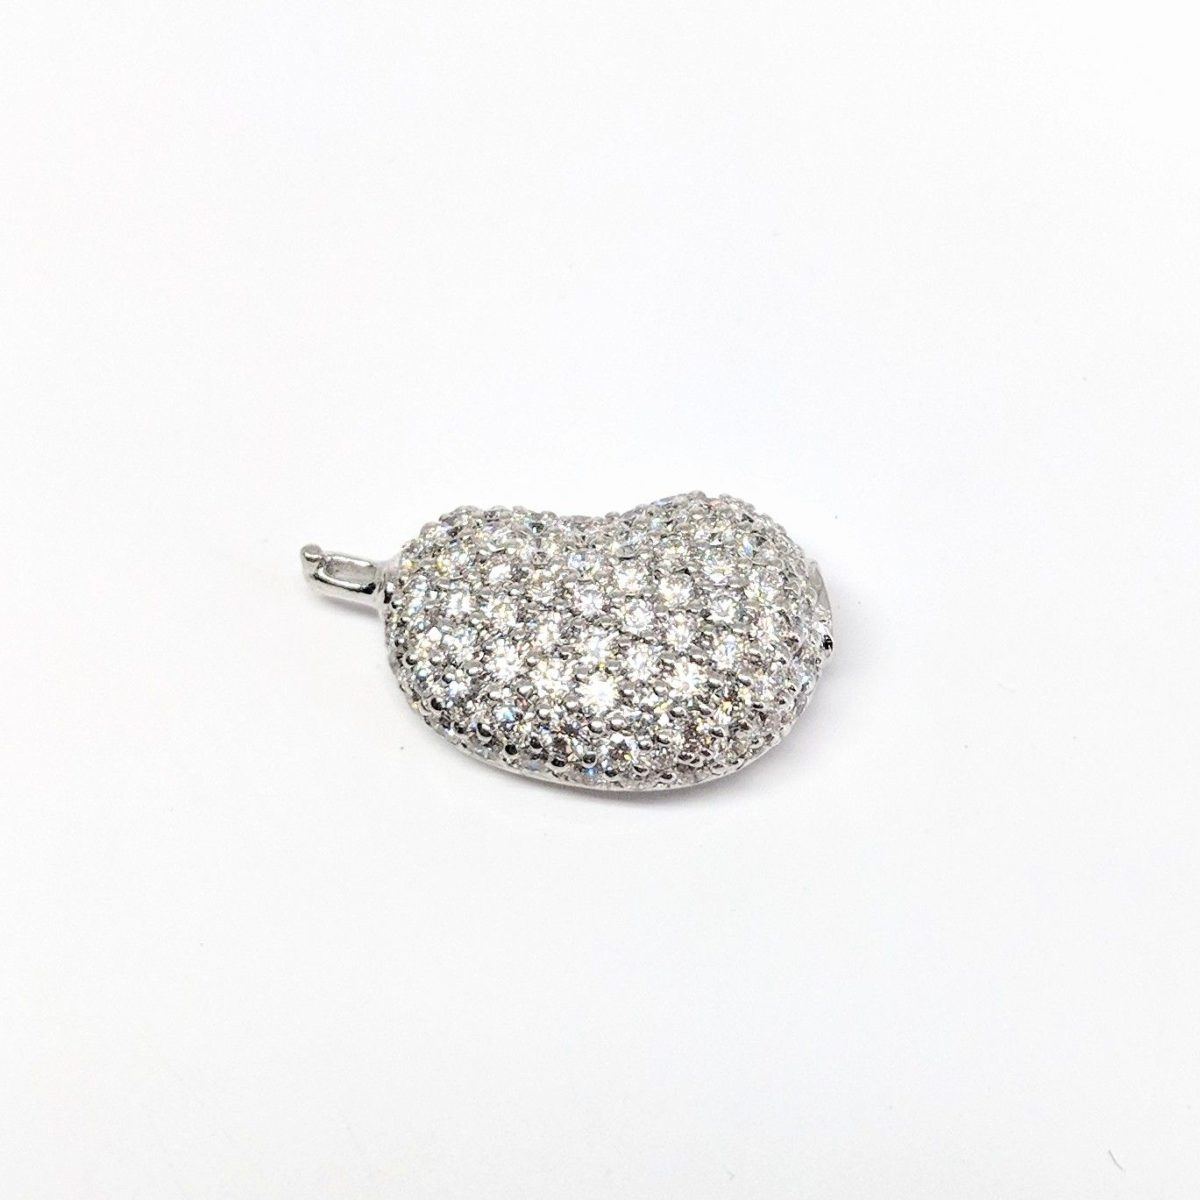 White Gold #3 Pave Rocca Bead